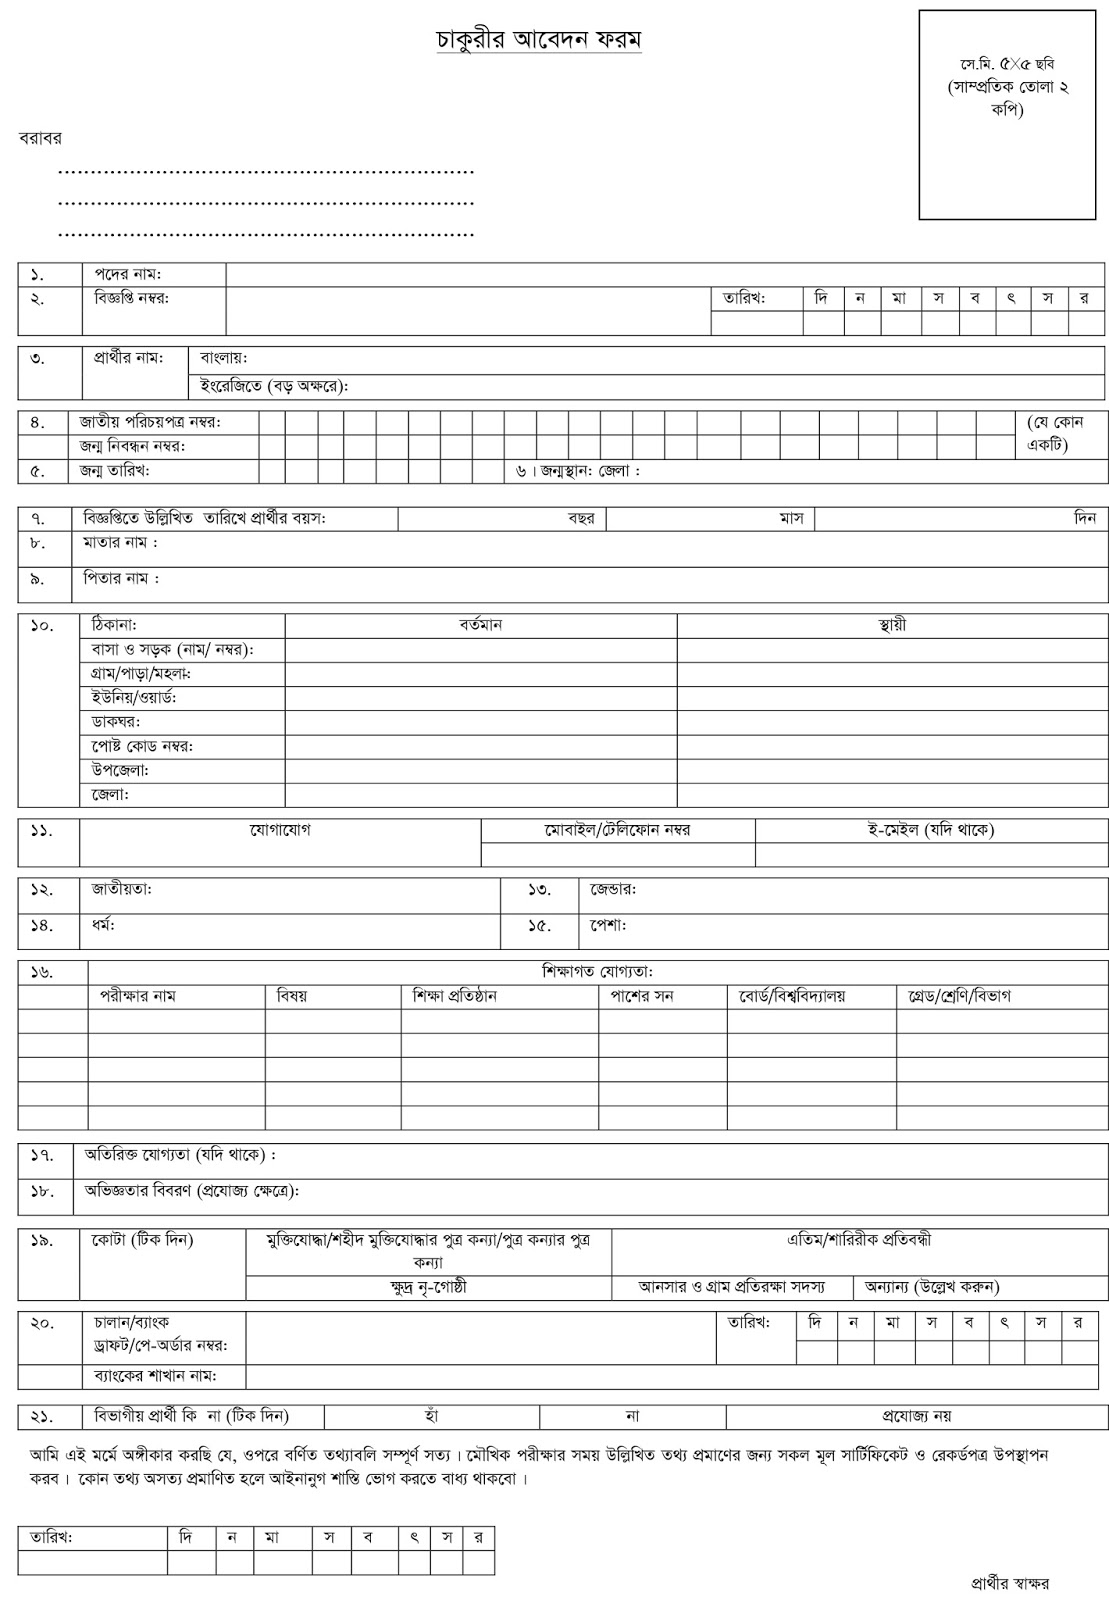 National Academy for Planning and Development (NAPD) Job Application Form